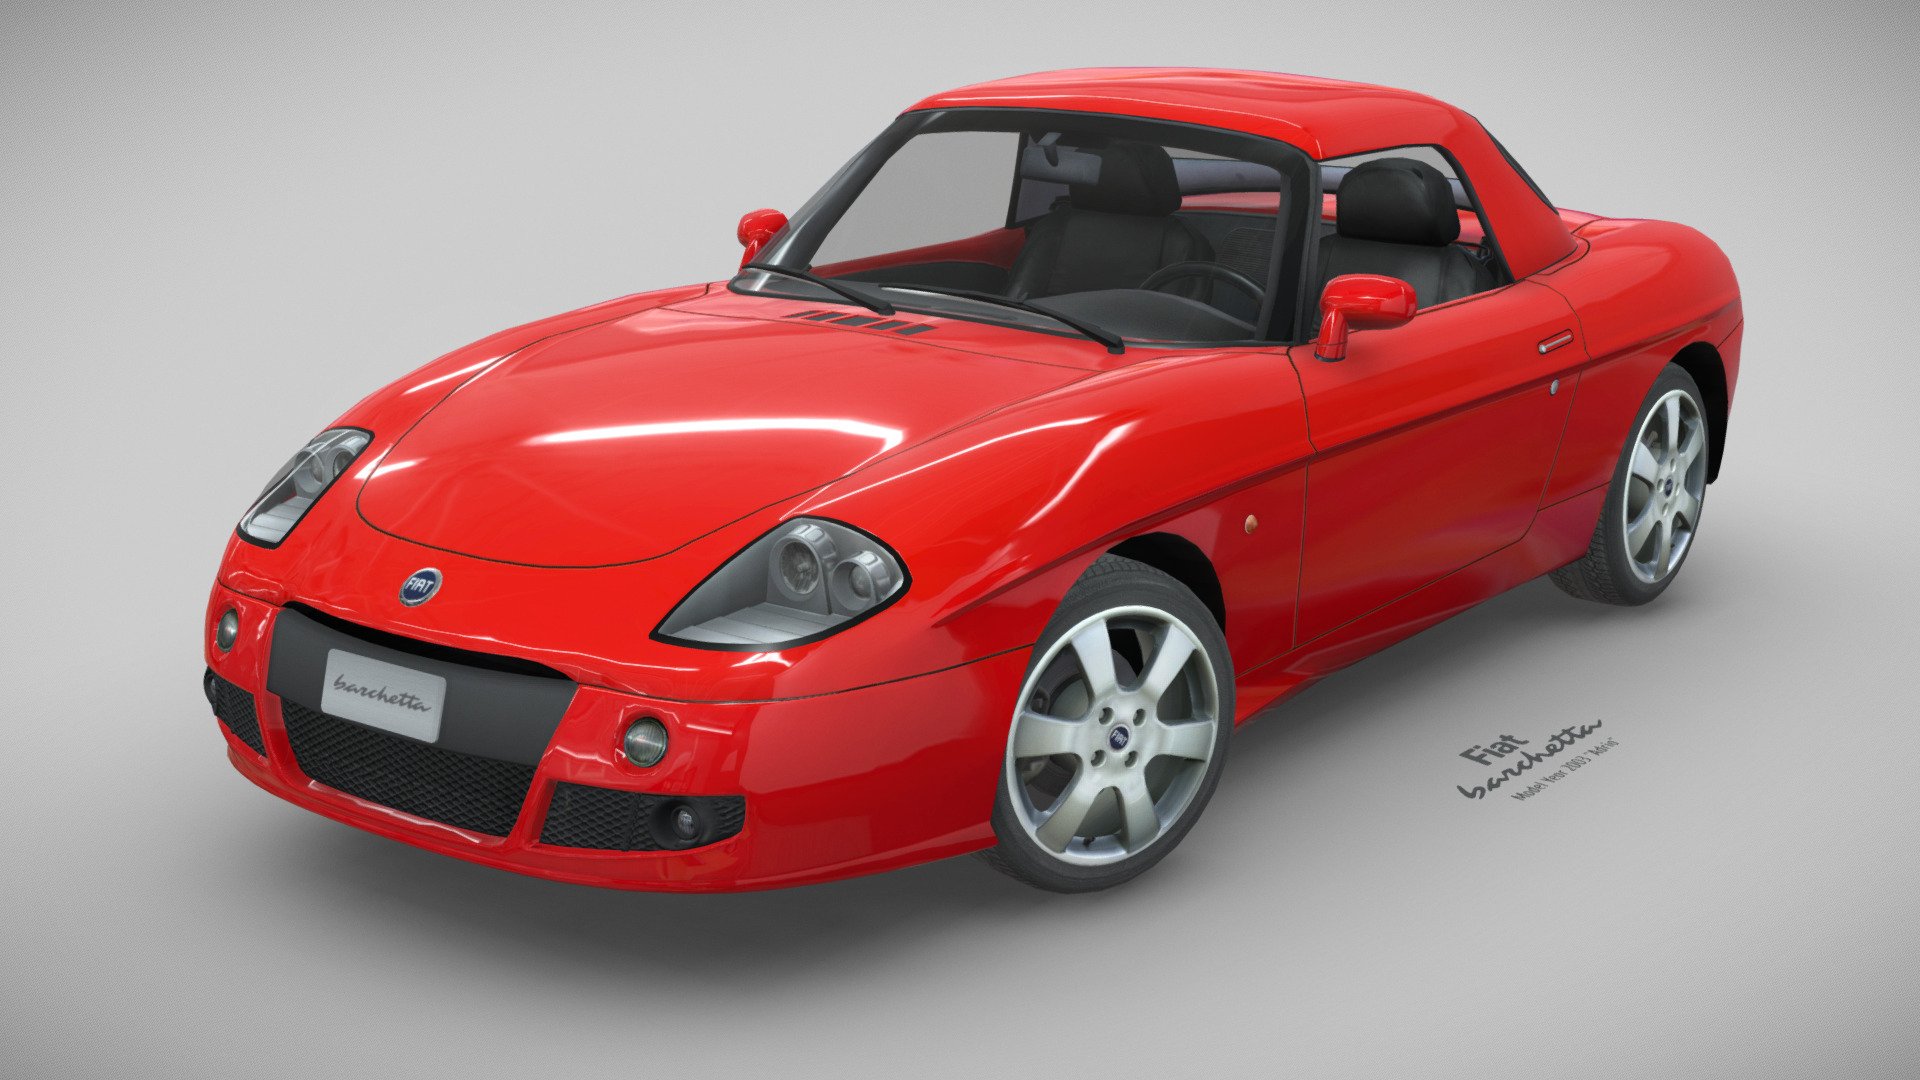 The Fiat Barchetta (Type 183) is a roadster produced by the Italian manufacturer Fiat from 1995 to 2005. &ldquo;Barchetta